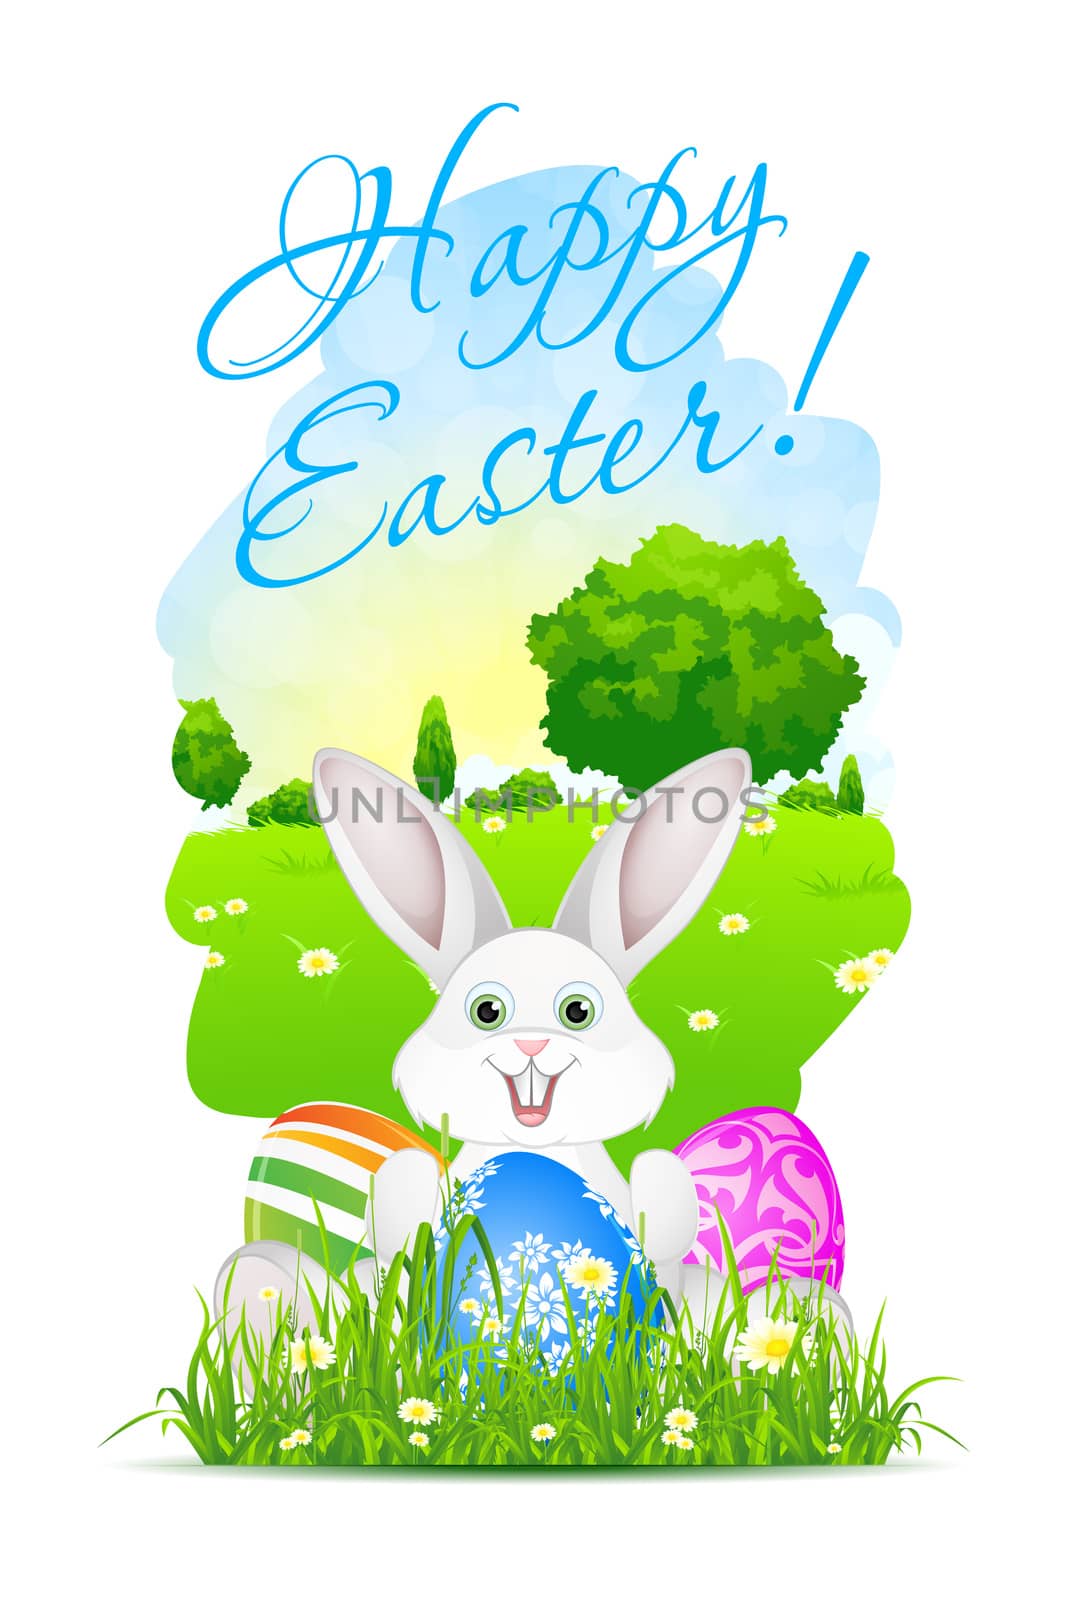 Easter Card with Landscape, Grass, Rabbit and Decorated Eggs